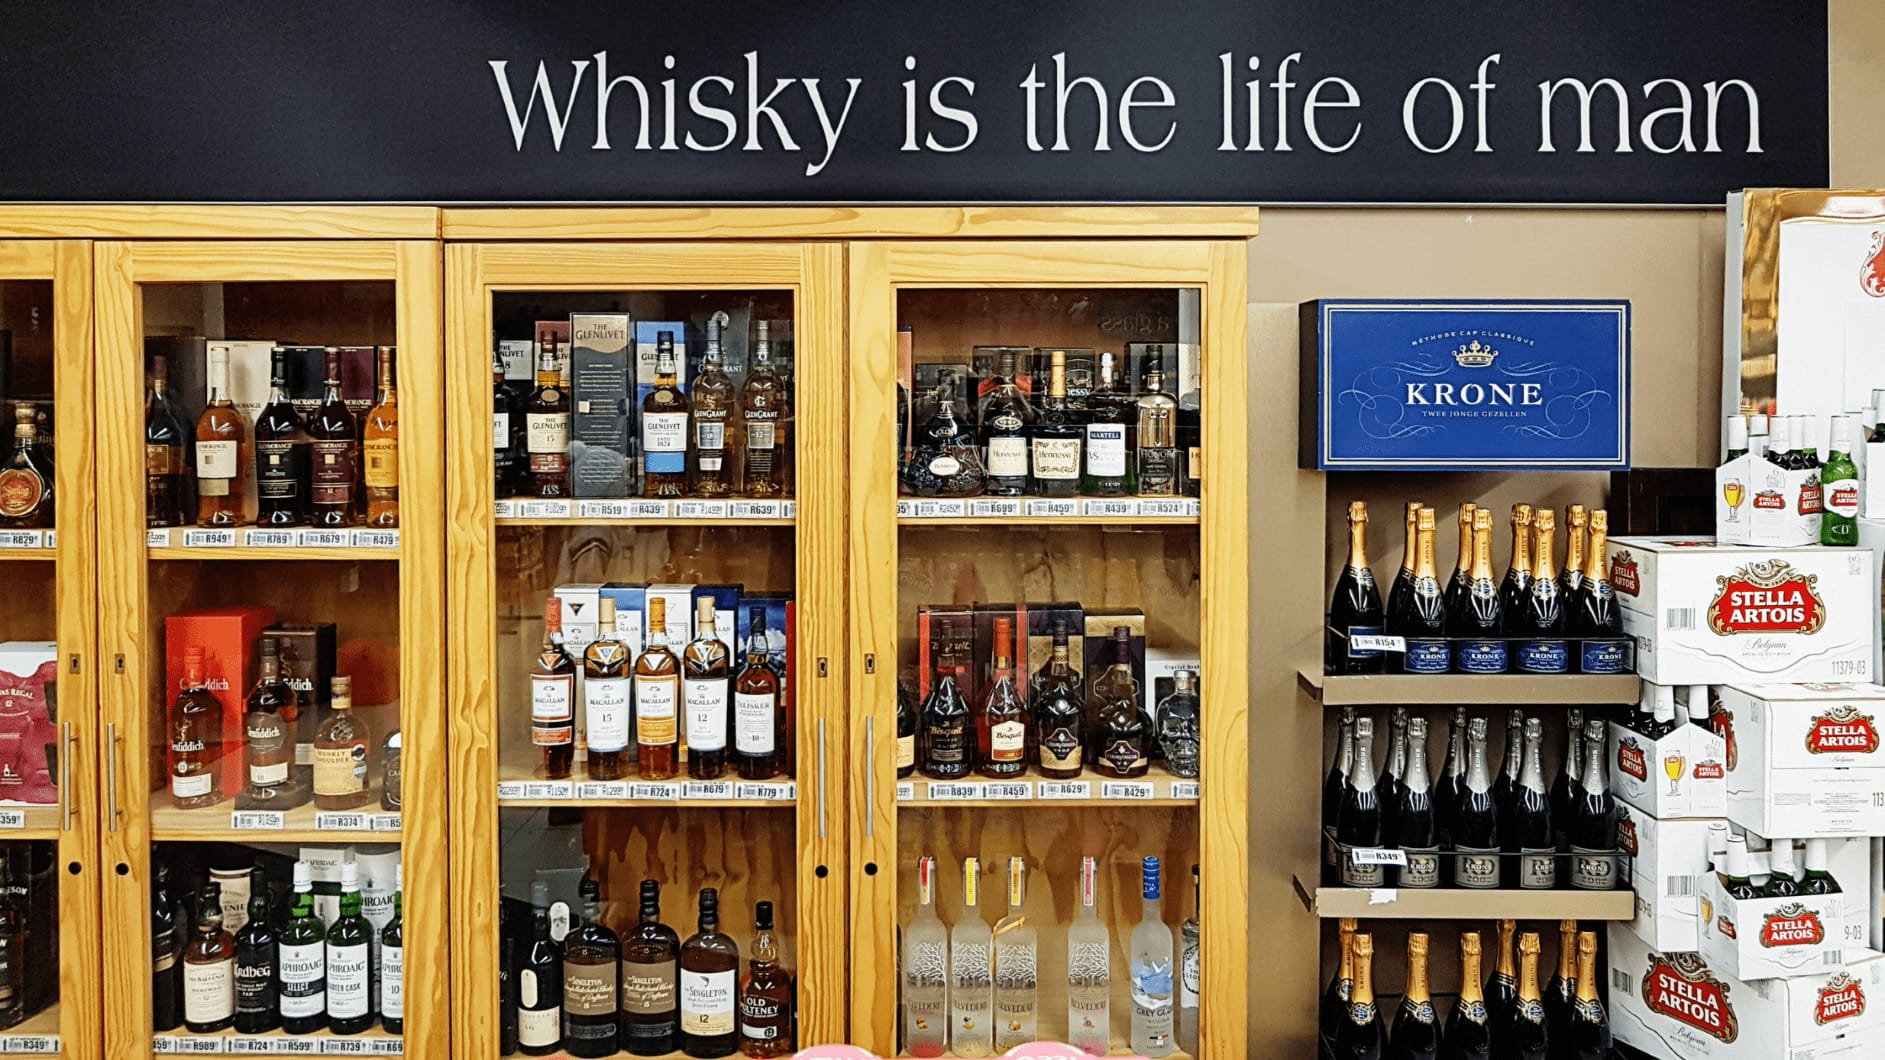 A photo with whiskey bottles on shelves and a sign that says "Whisky is the life of man"